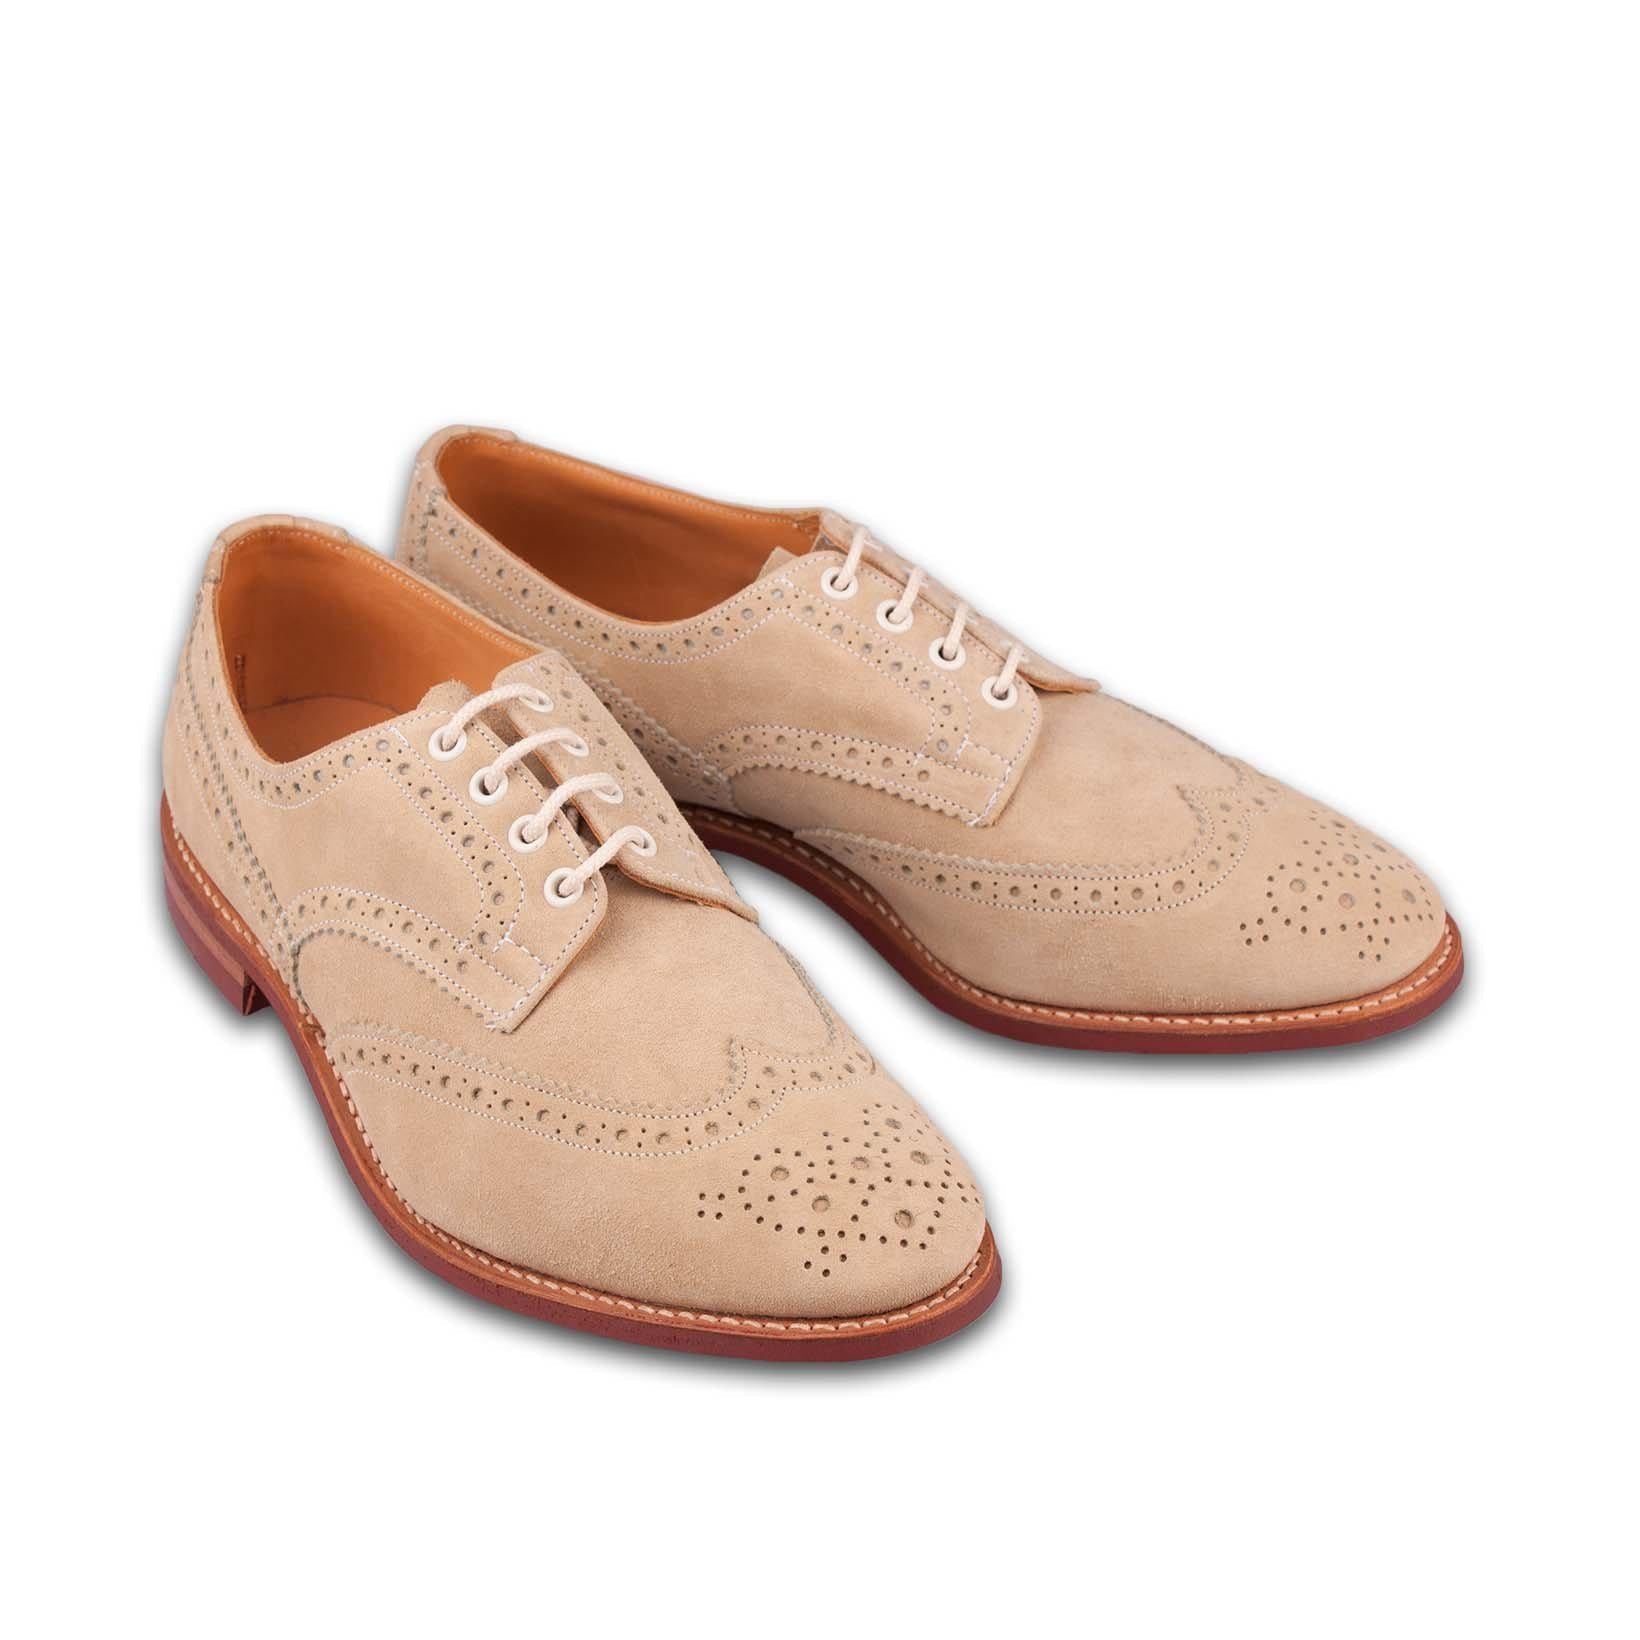 Derby Brogues-Tricker's-Conrad Hasselbach Shoes & Garment